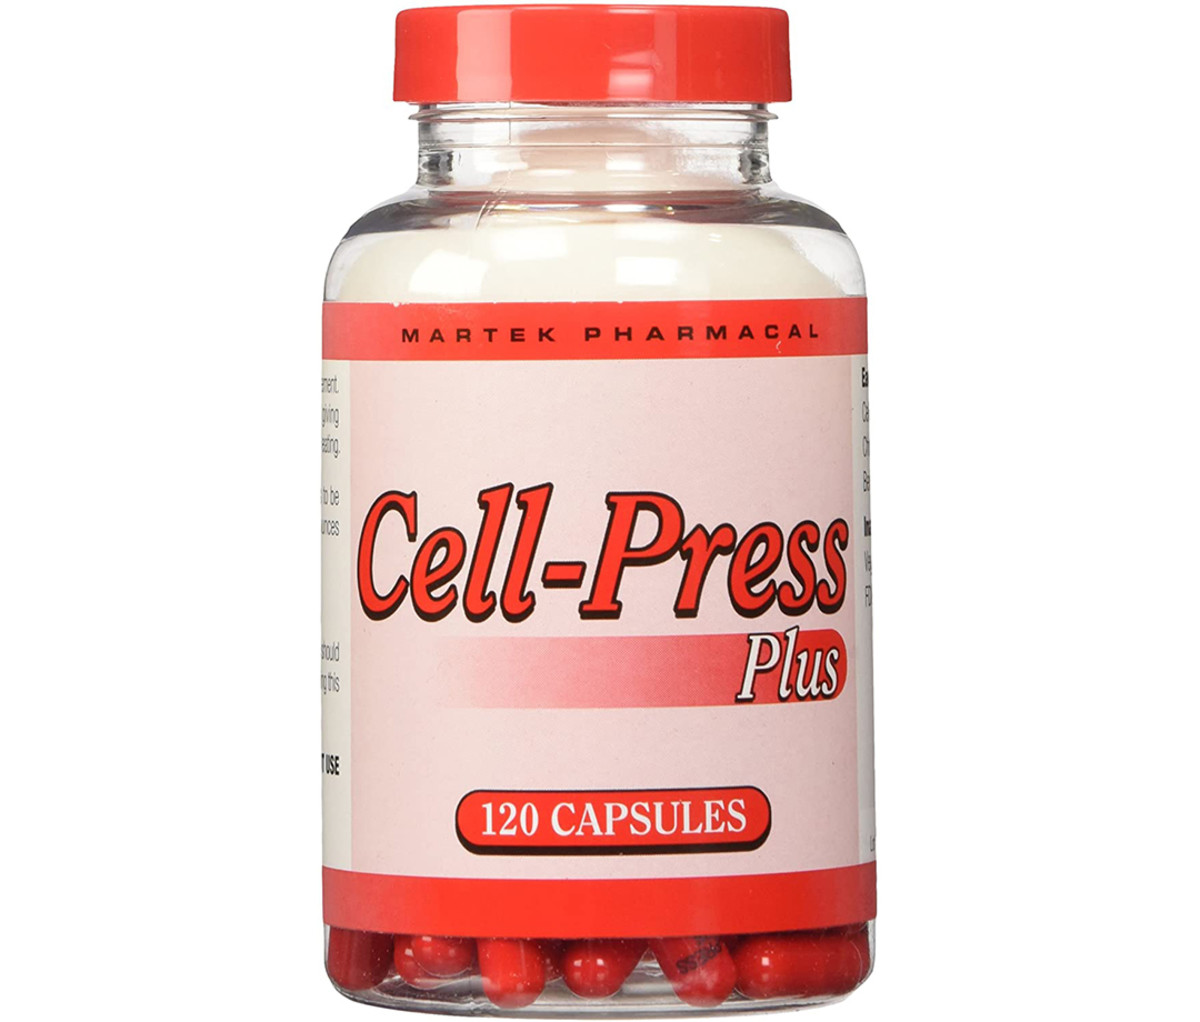 Cell Press Plus Weight Loss Supplement